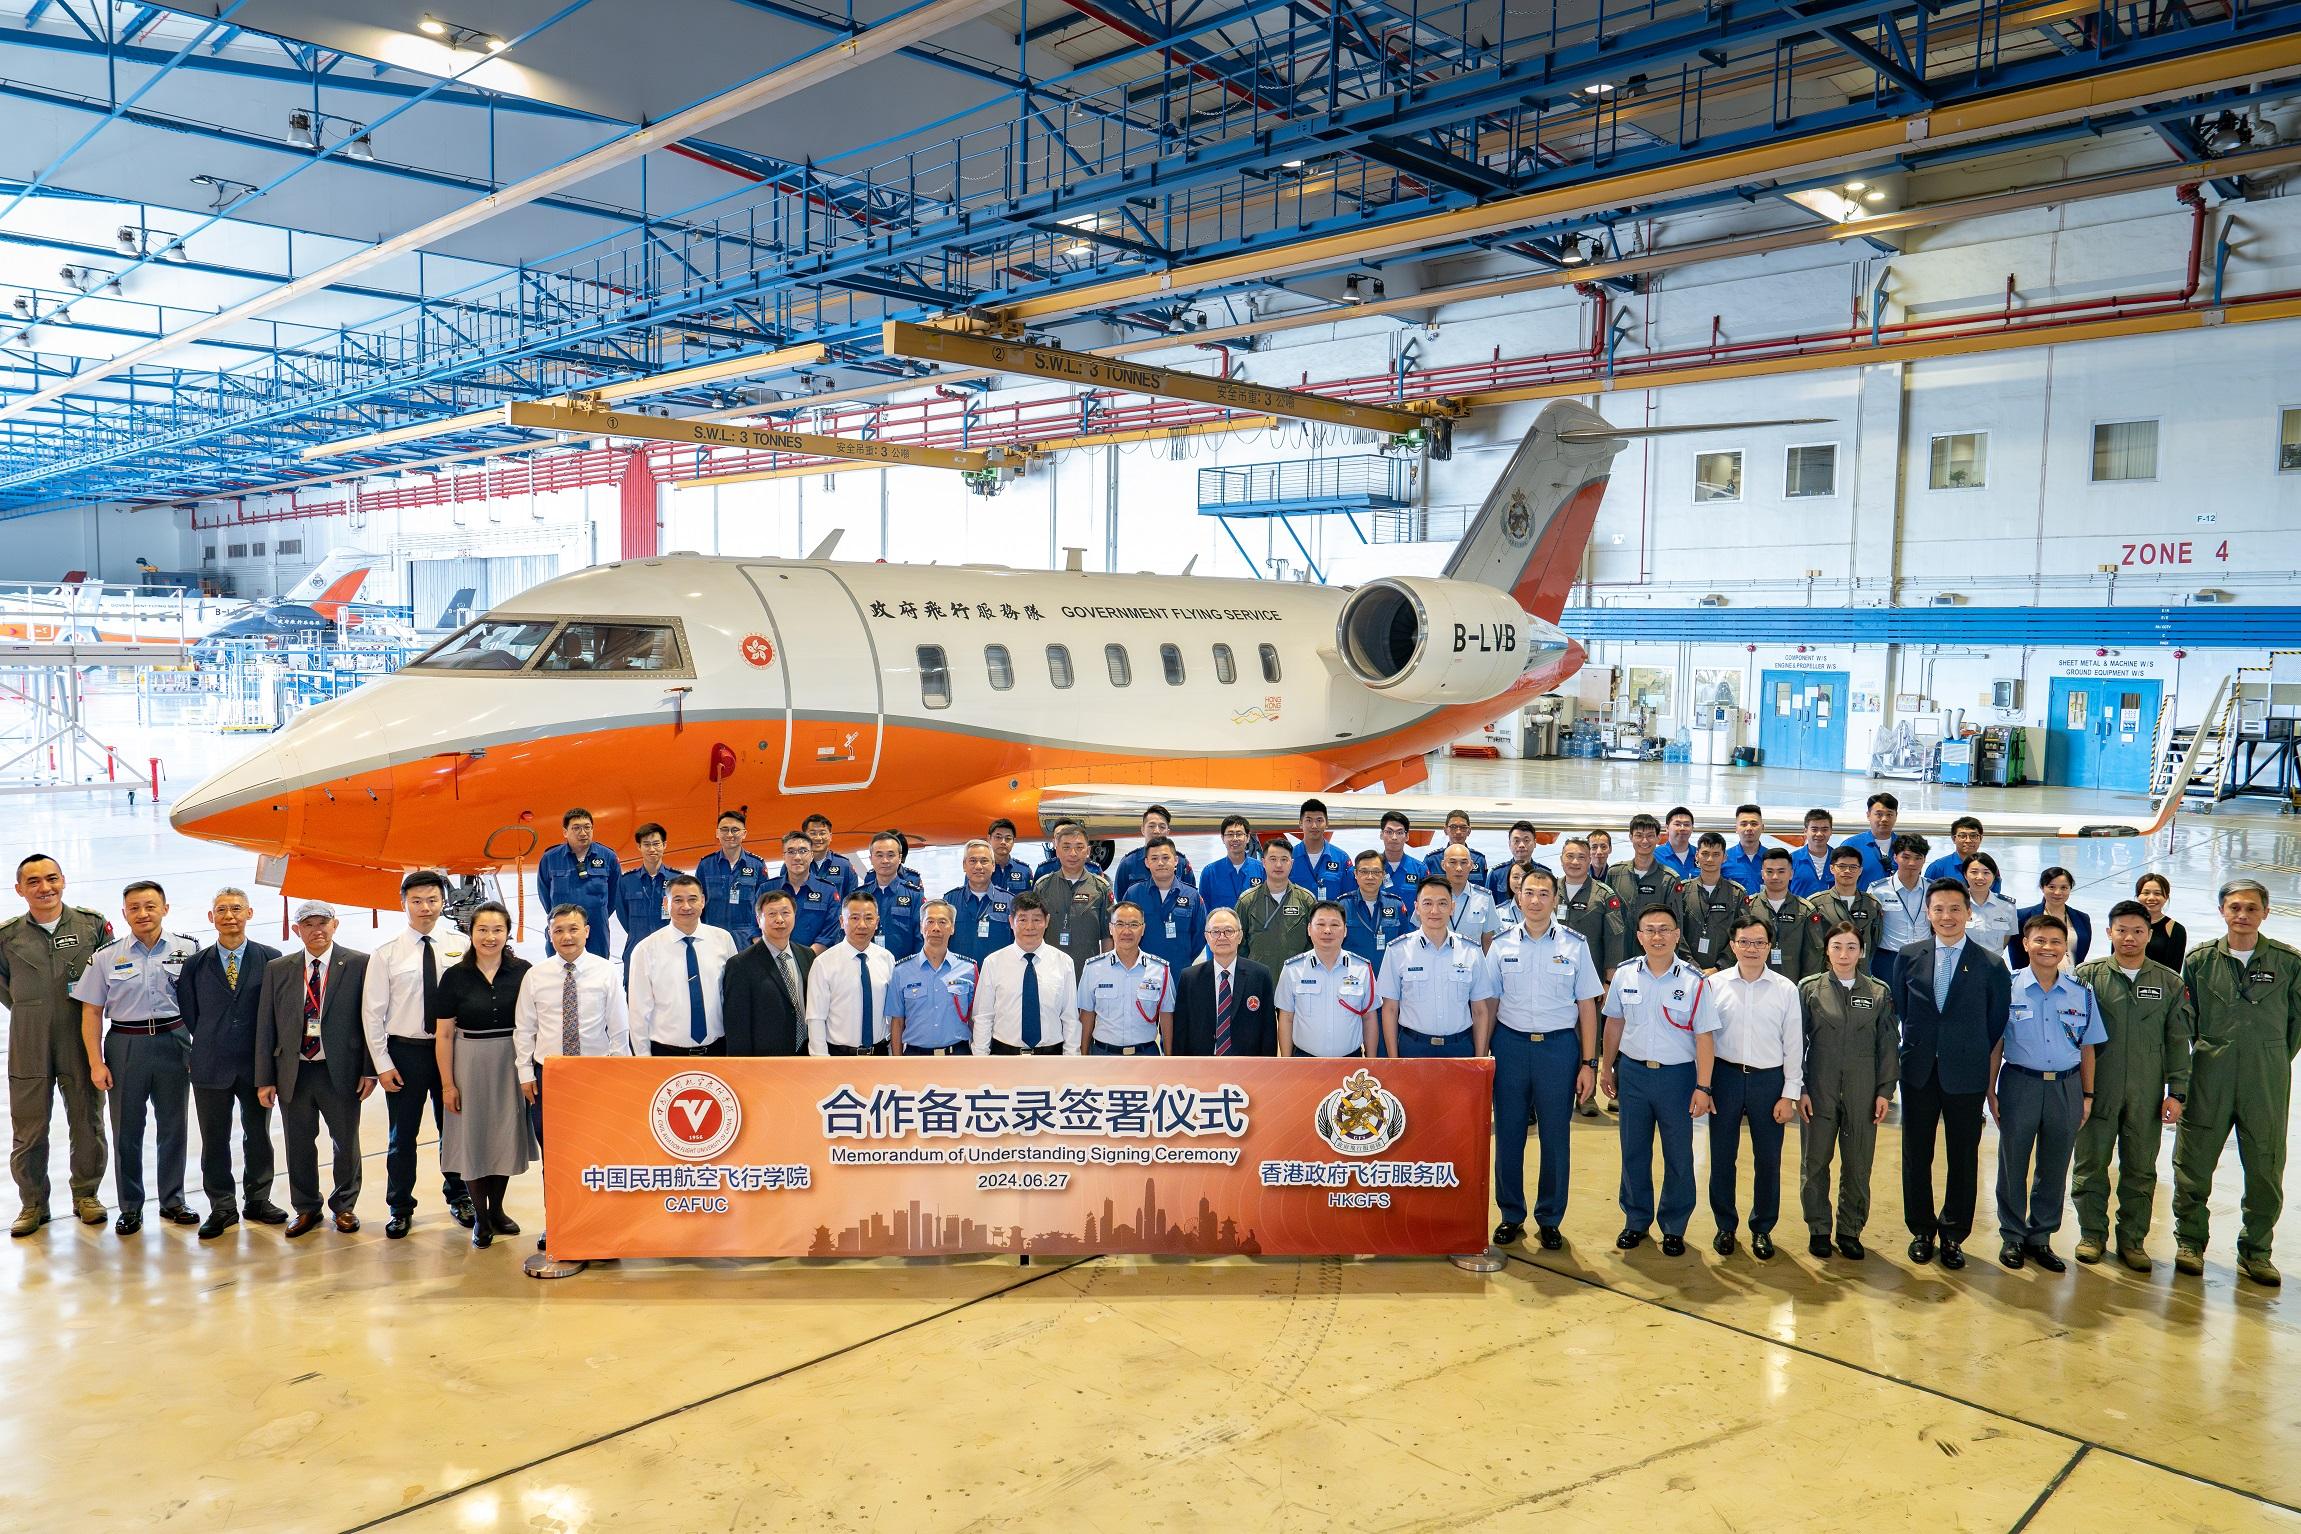 The Government Flying Service and the Civil Aviation Flight University of China signed a memorandum of understanding today (June 27) to underpin closer collaboration. Photo shows guests and participants after the ceremony.